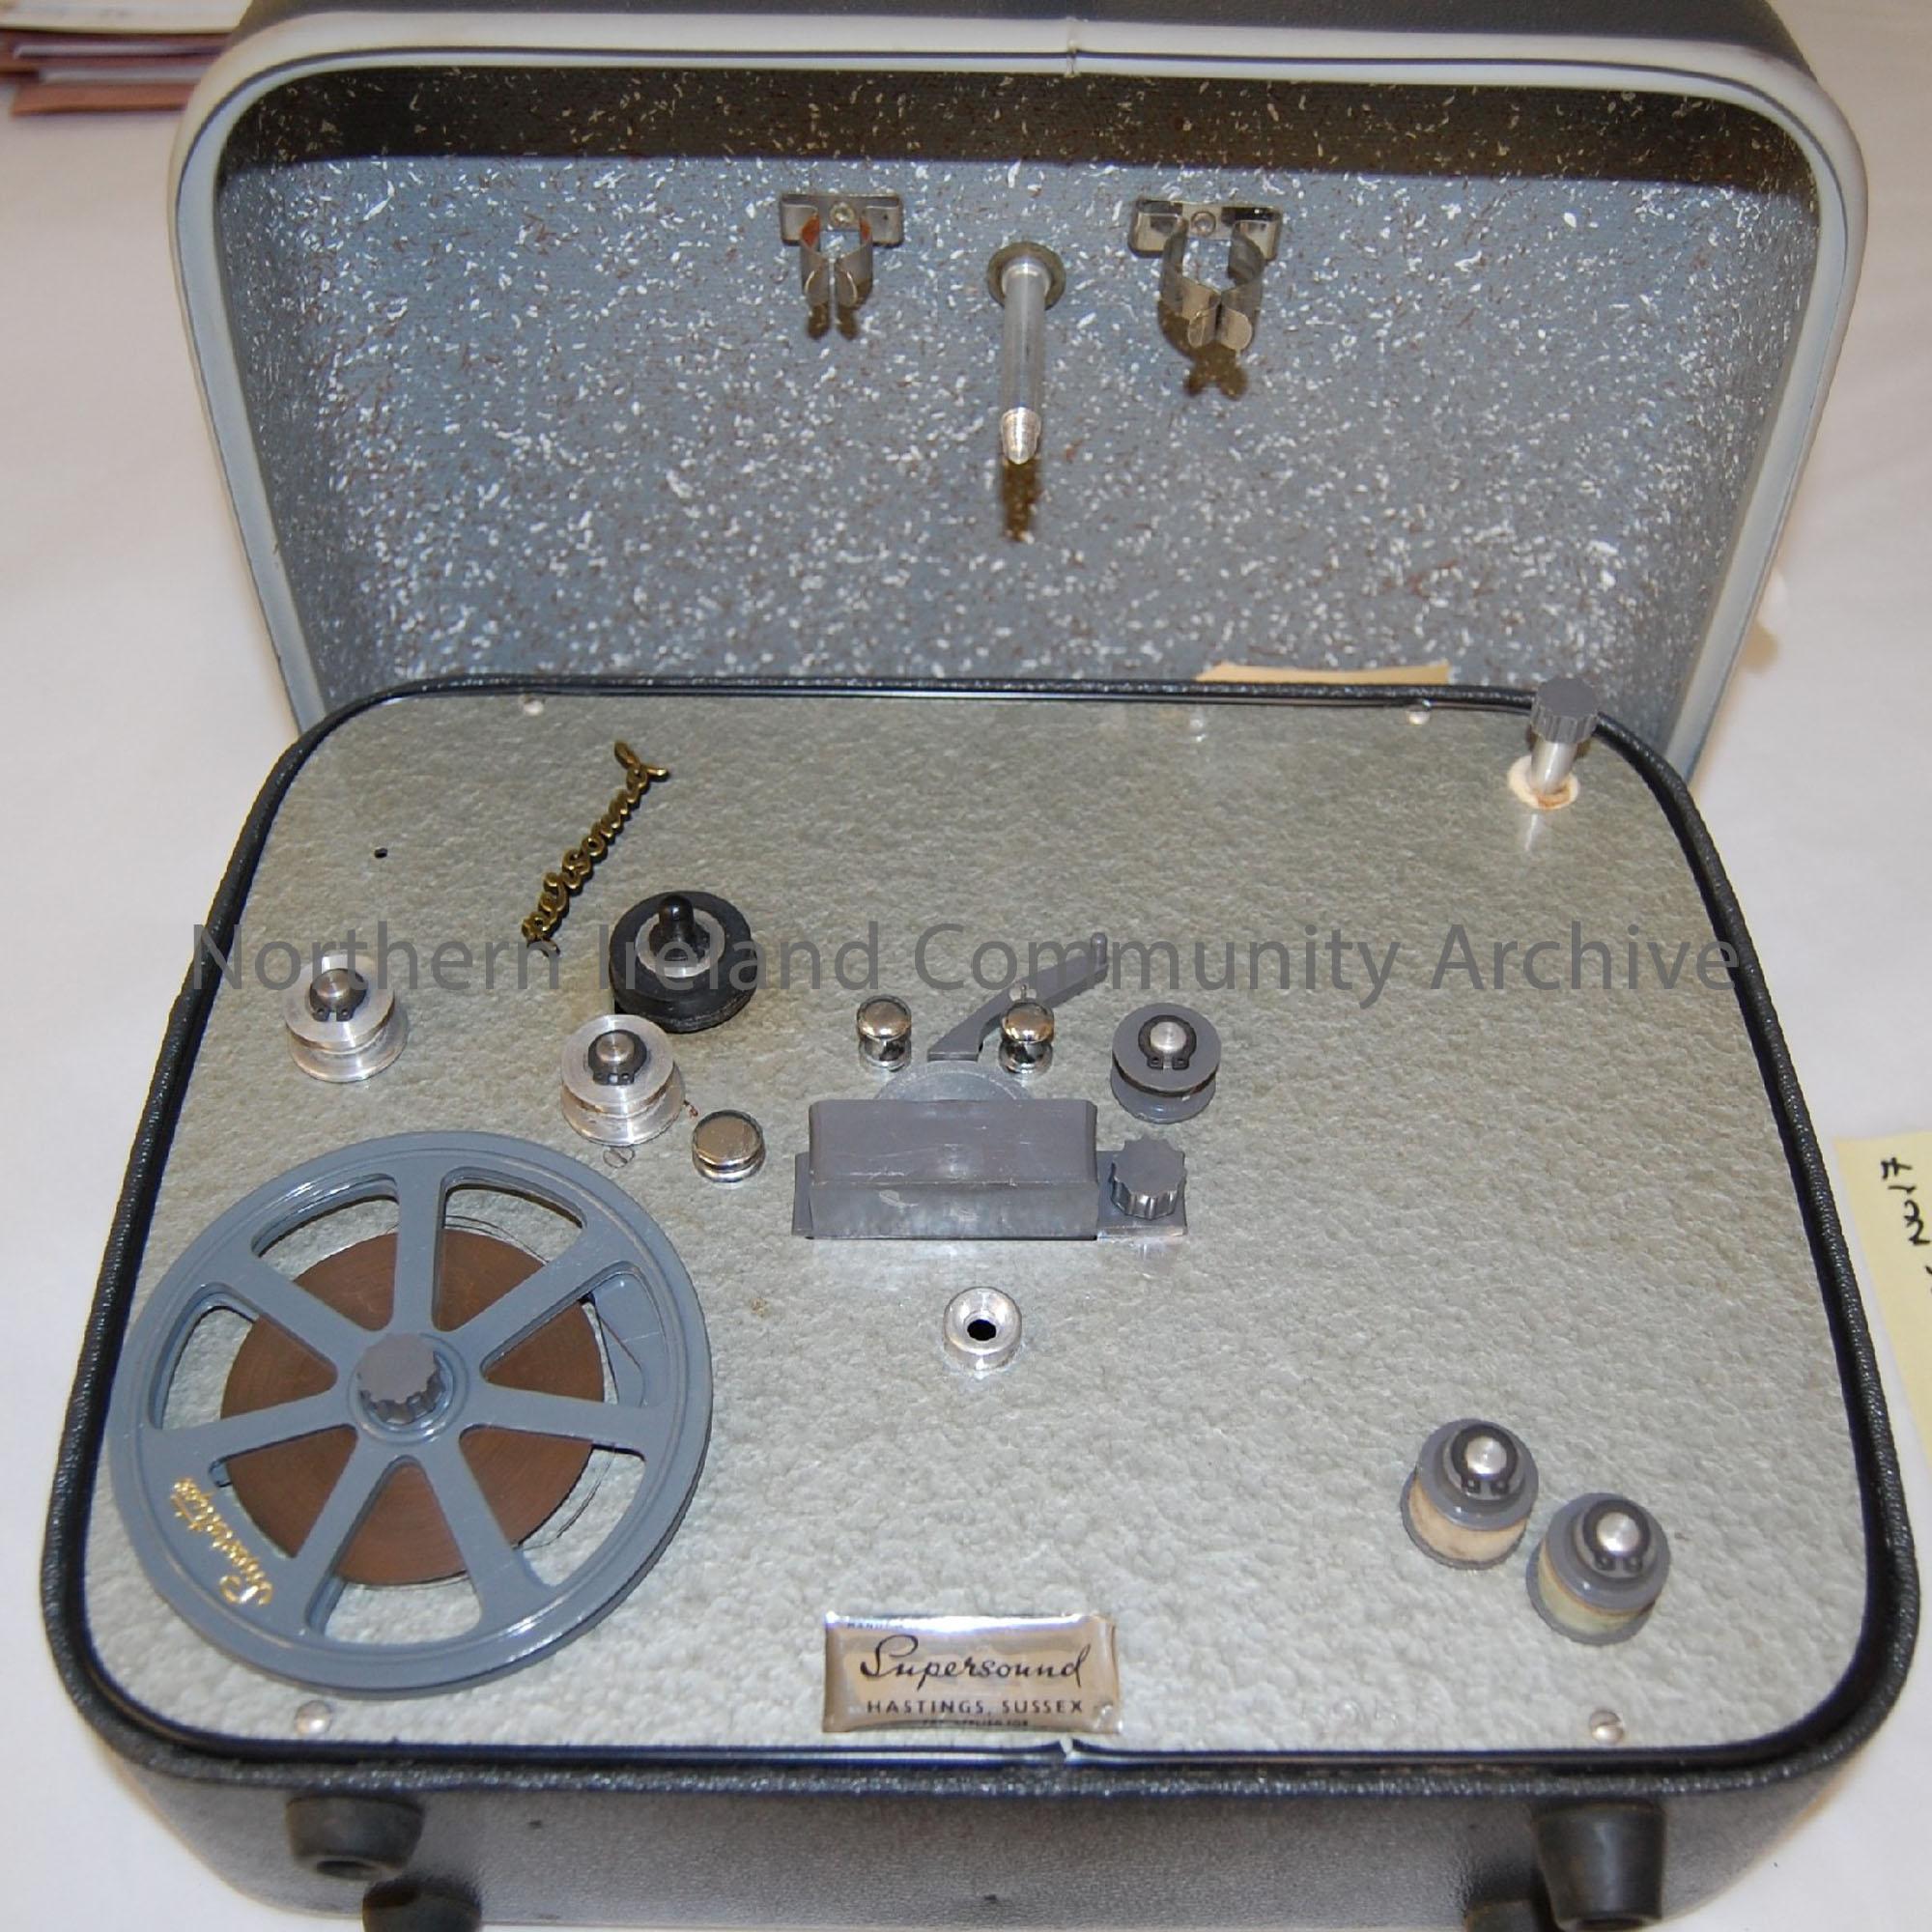 film striper encased in hard plastic case. Personnel model no. 5255, manufactured by Supersound, Hastings